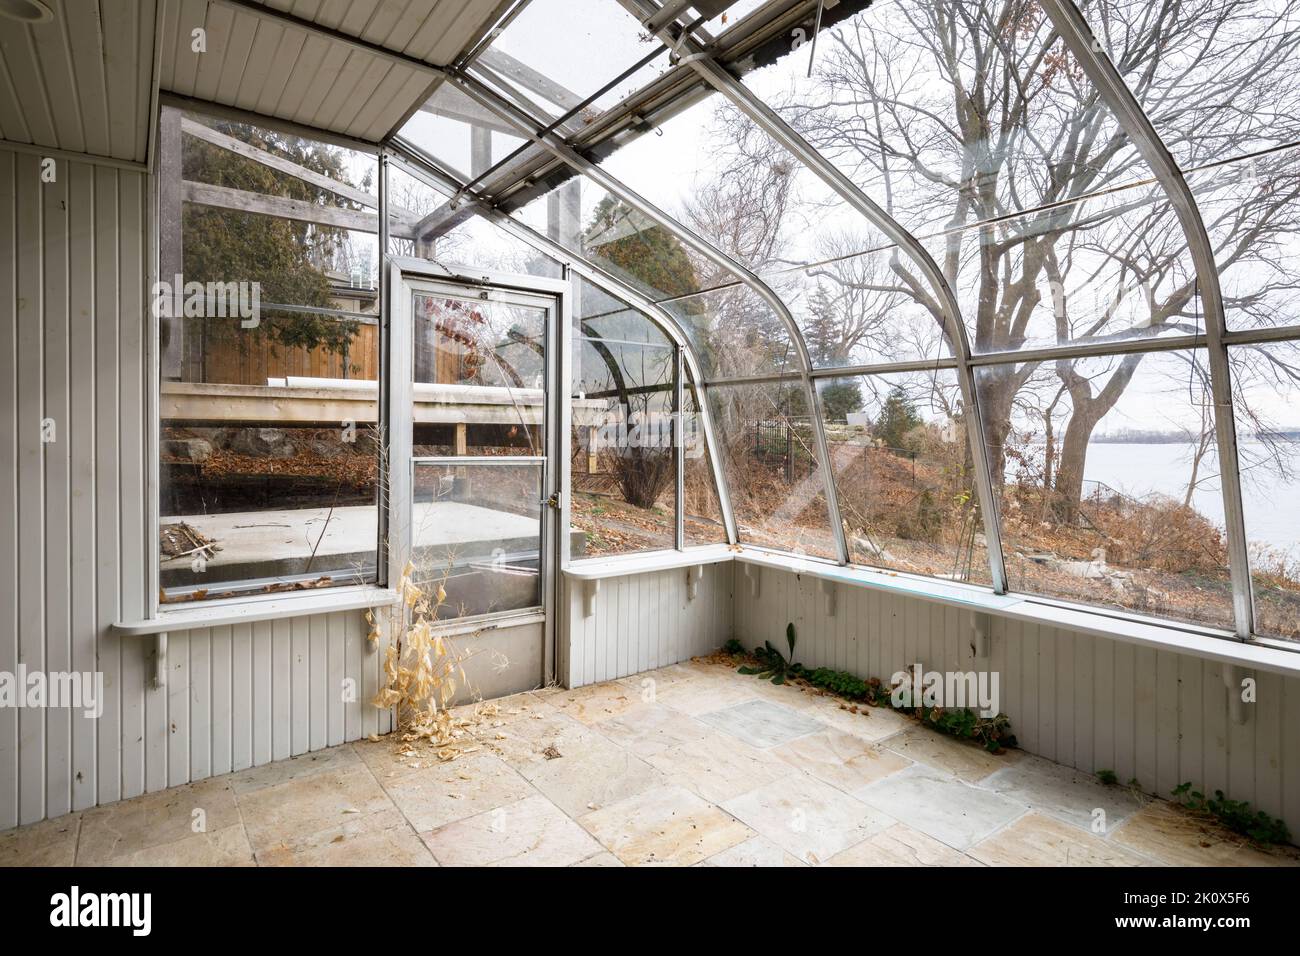 A greenhouse built onto the back of a house. This home has since been demolished. Stock Photo